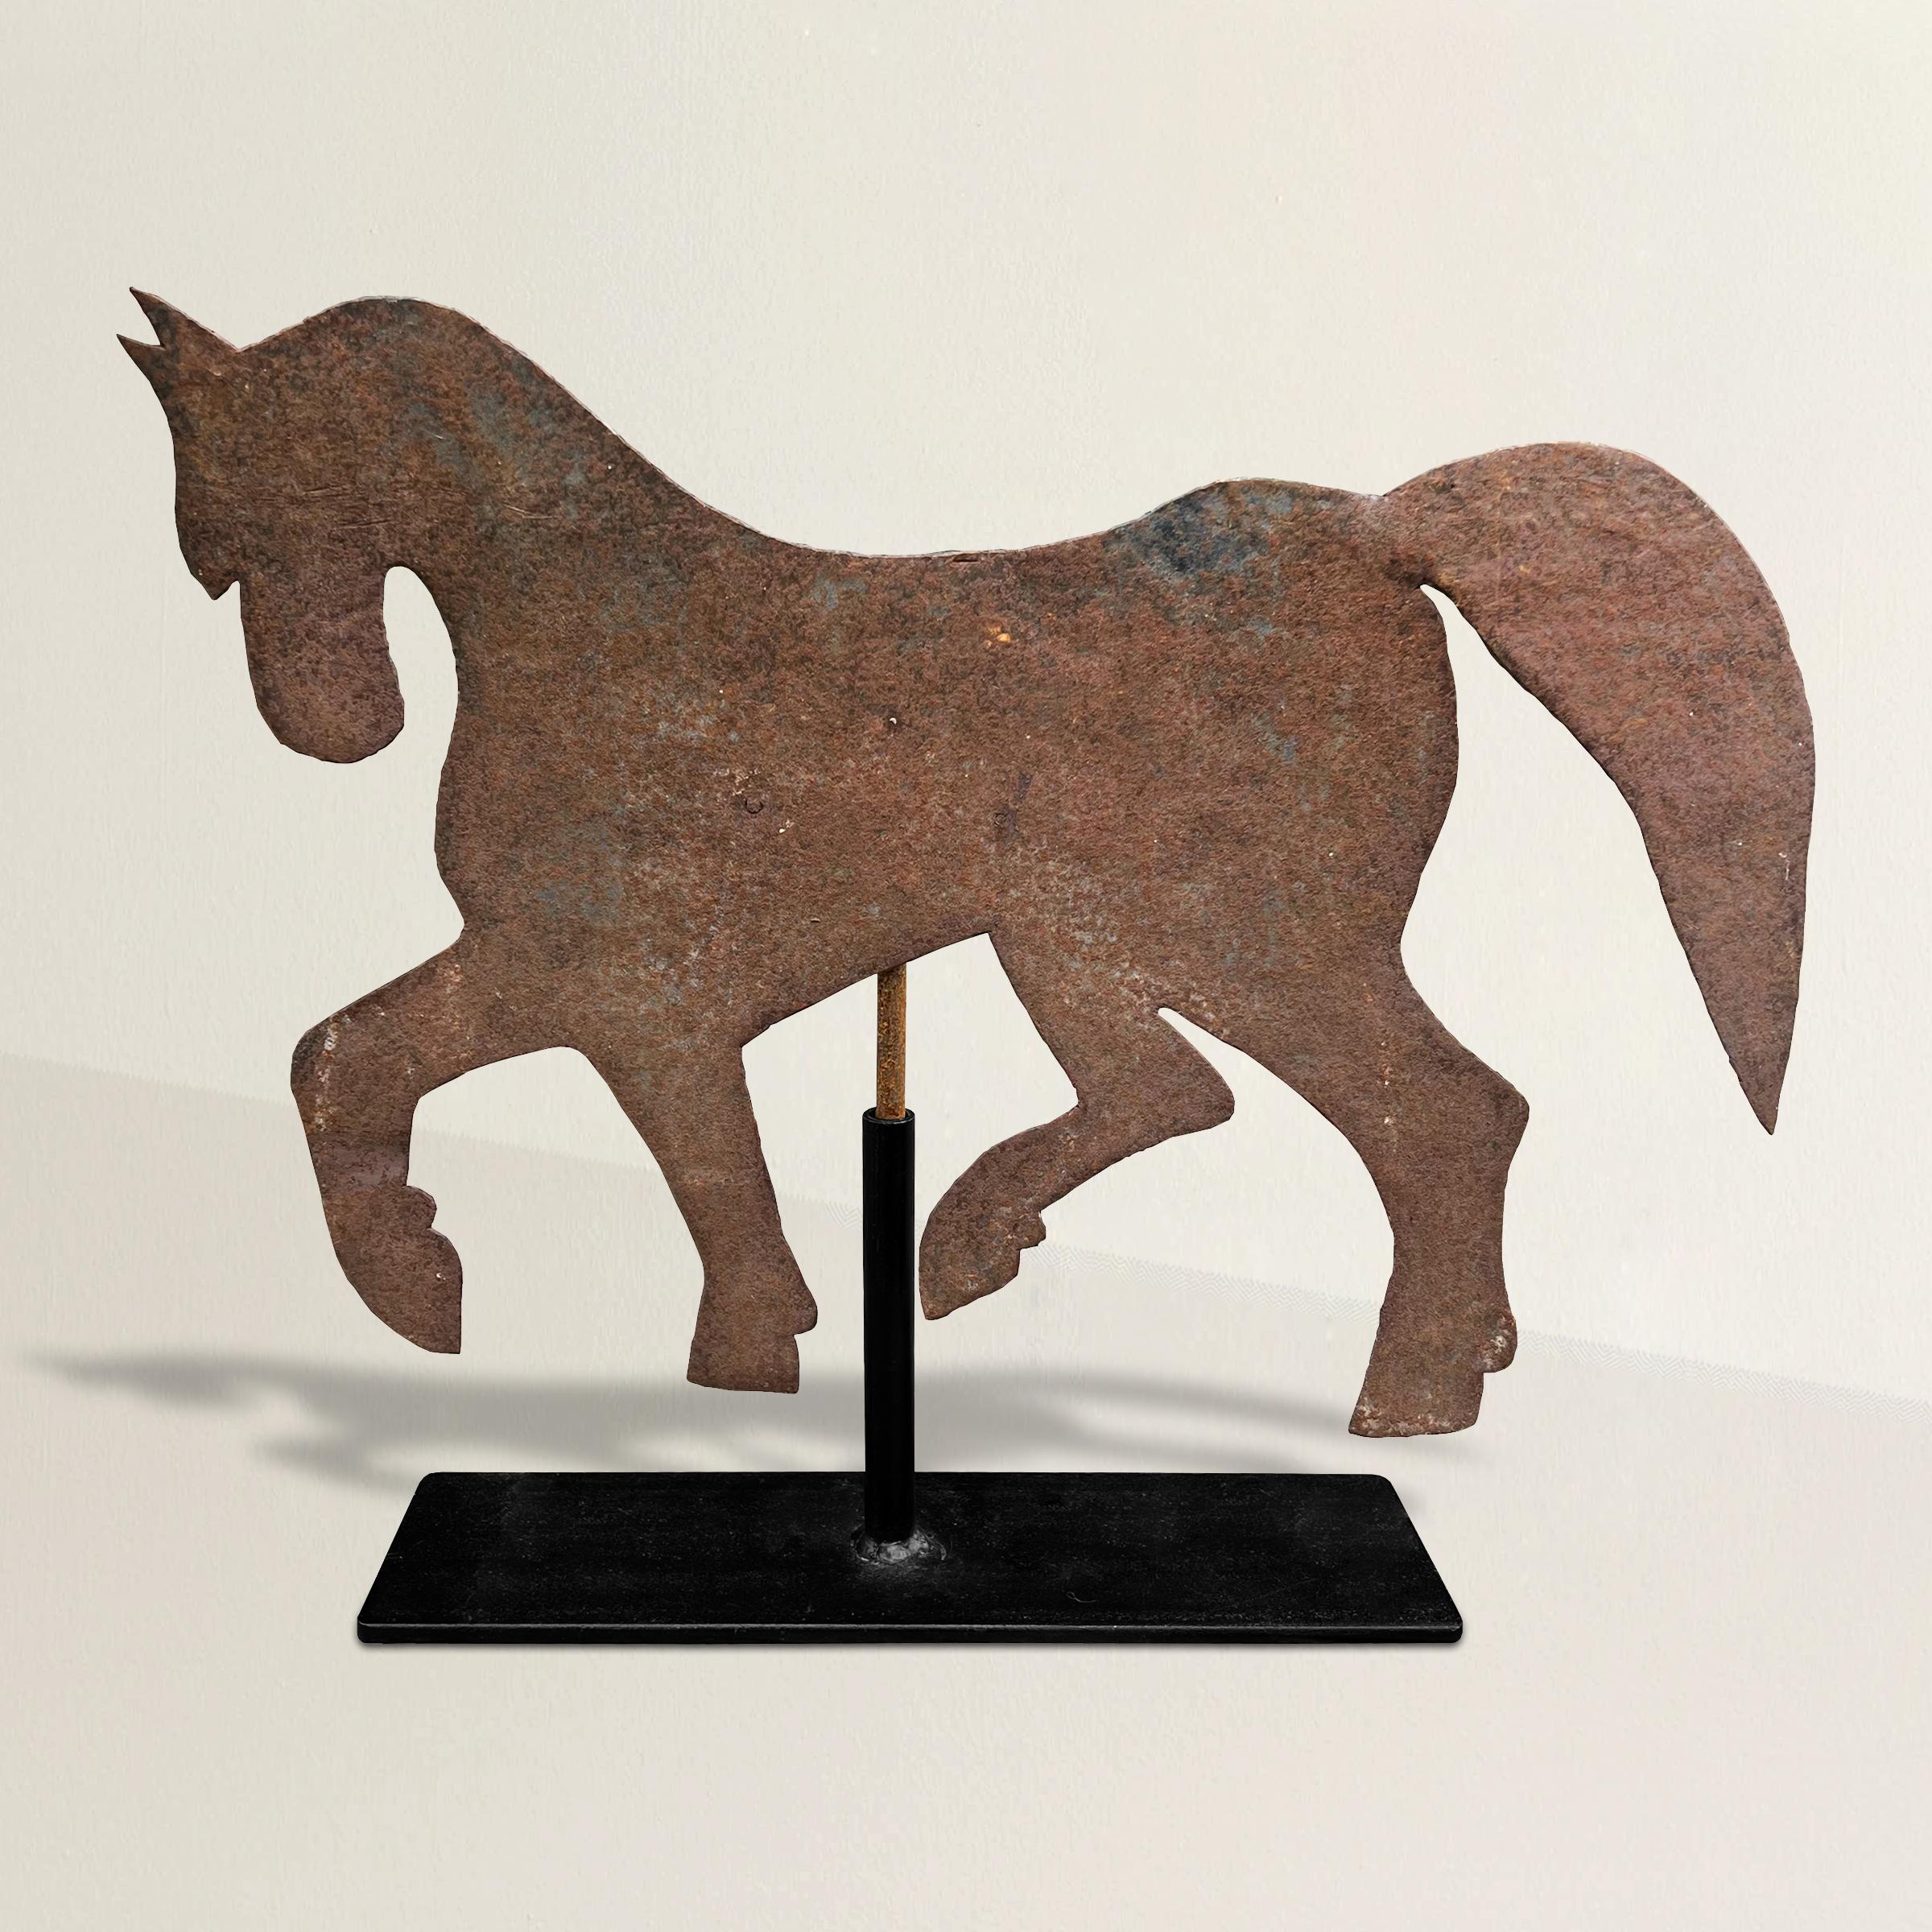 This early 20th century American folk art draught horse weathervane is a remarkable piece crafted from sheet metal, capturing the essence of traditional American folk art. The weathervane features a charming draught horse design, skillfully formed